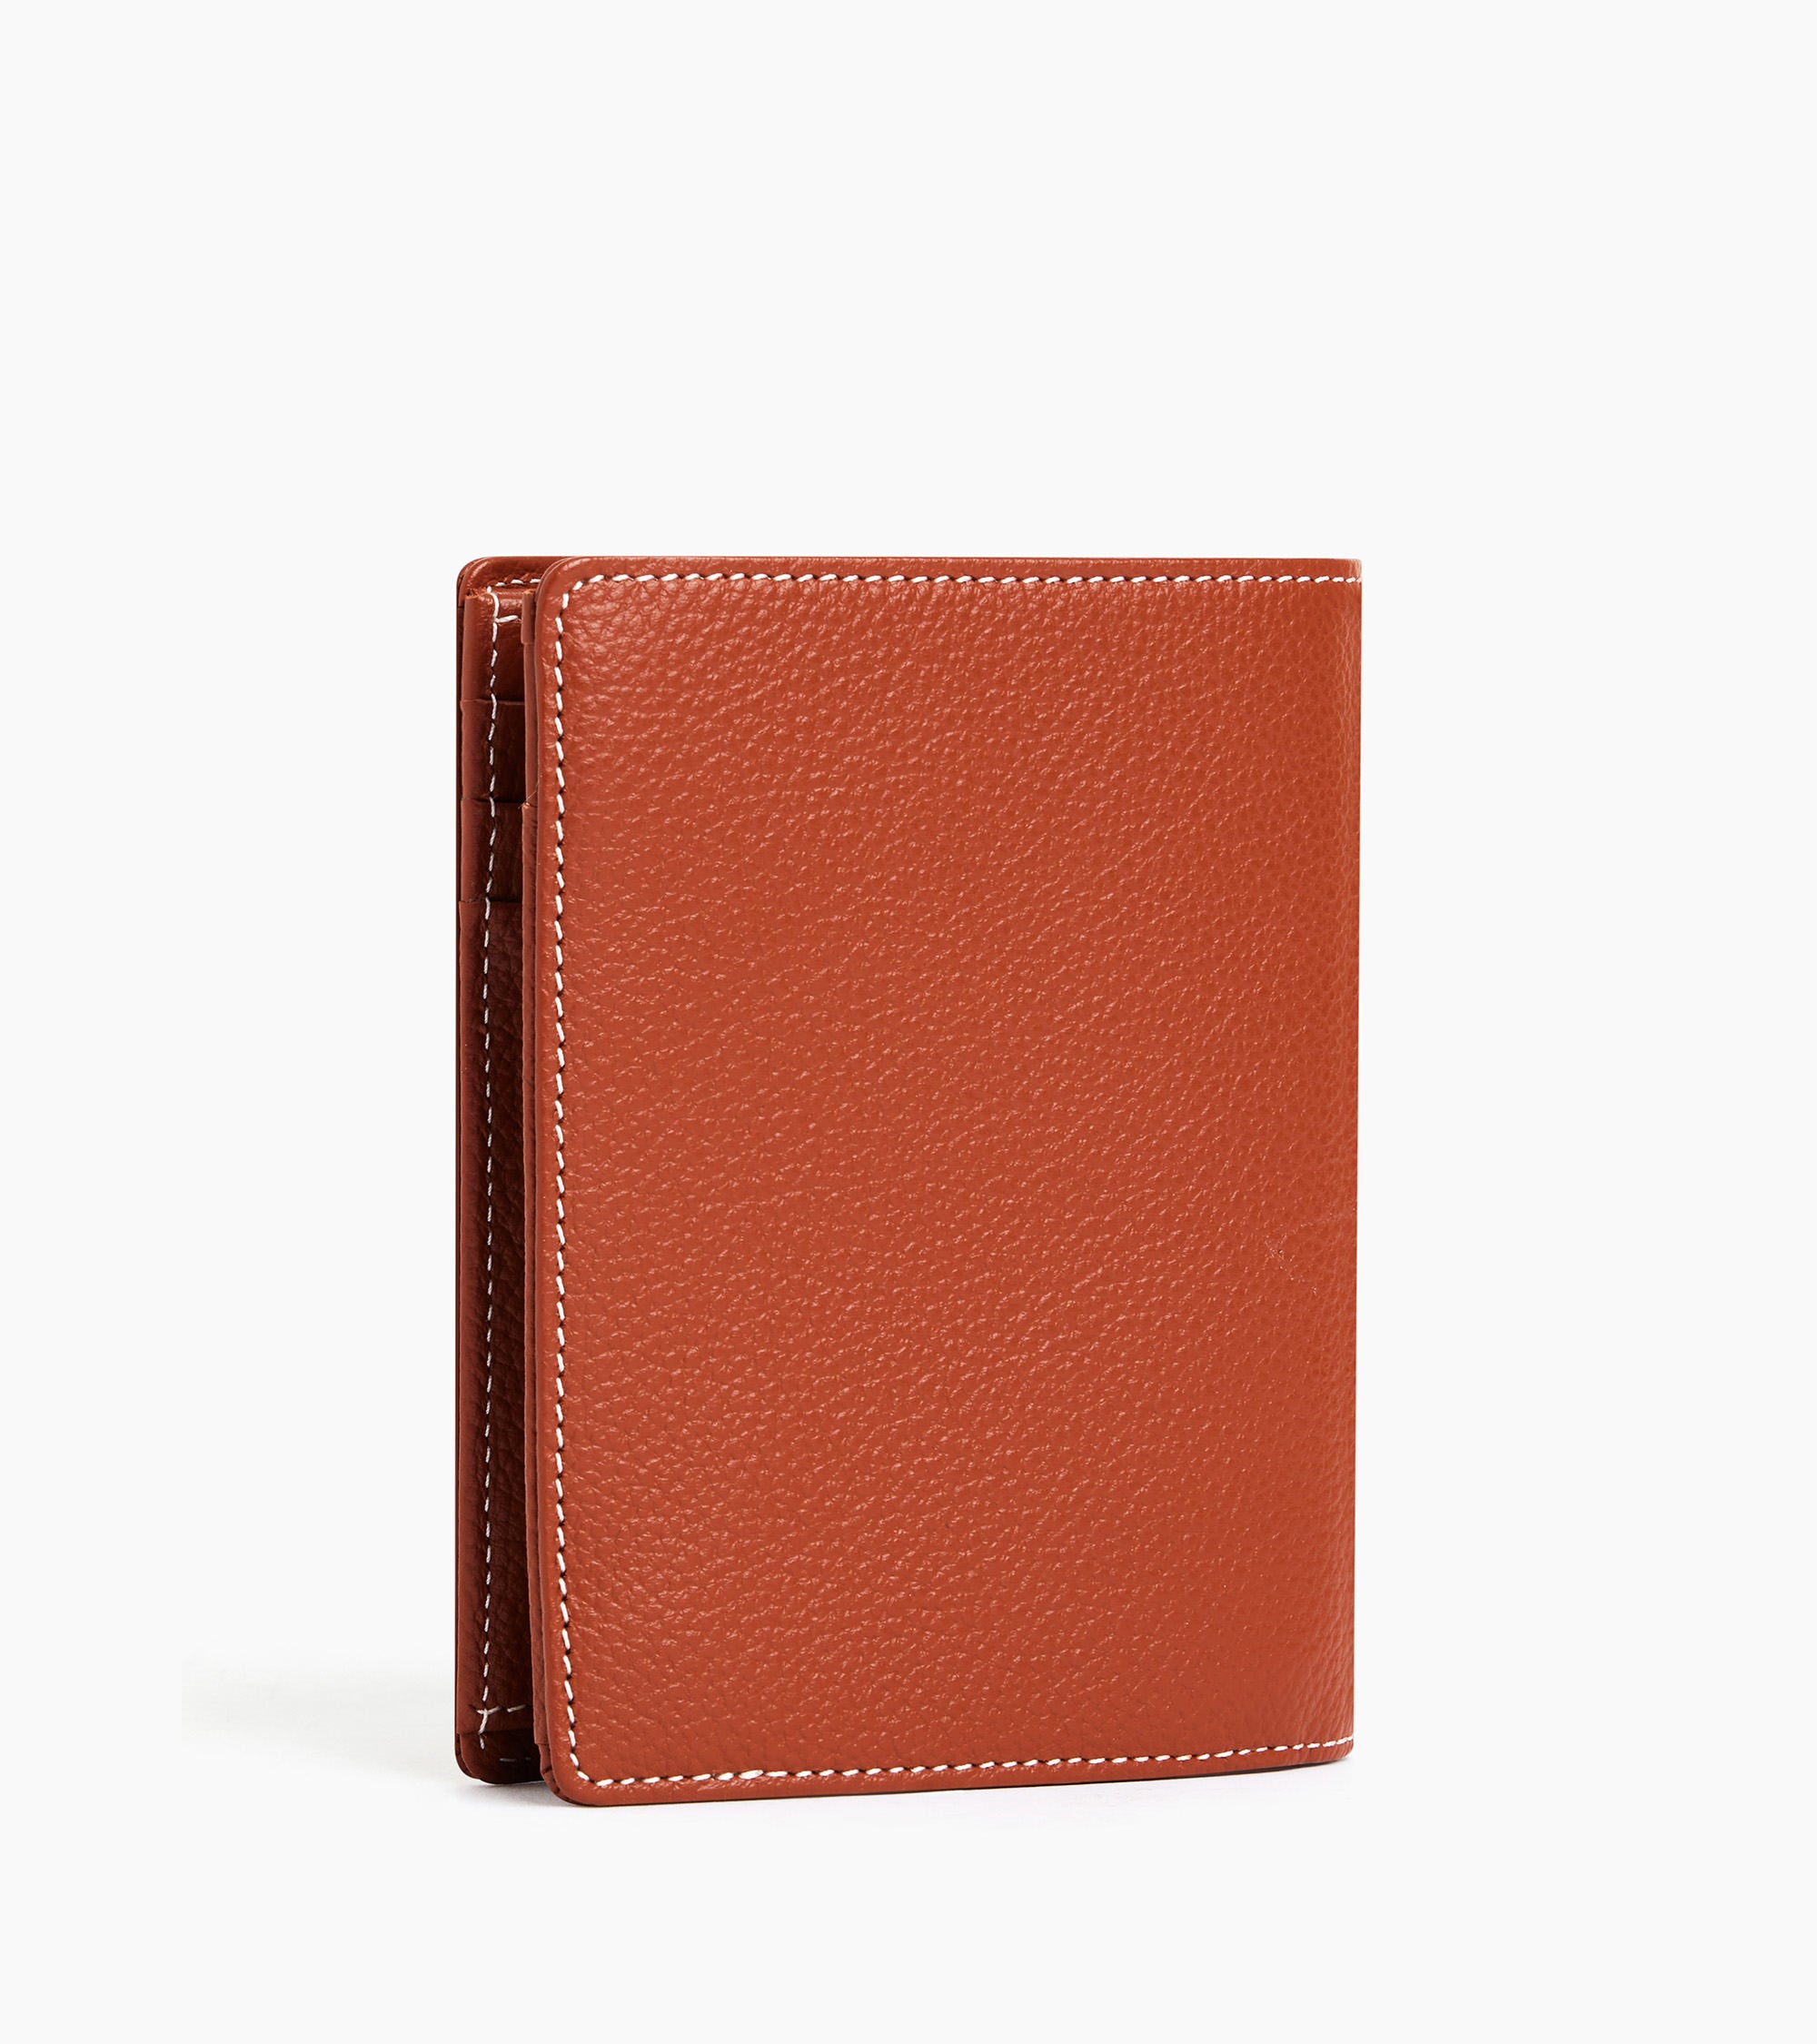 Emile vertical, zipped wallet with 2 gussets in pebbled leather